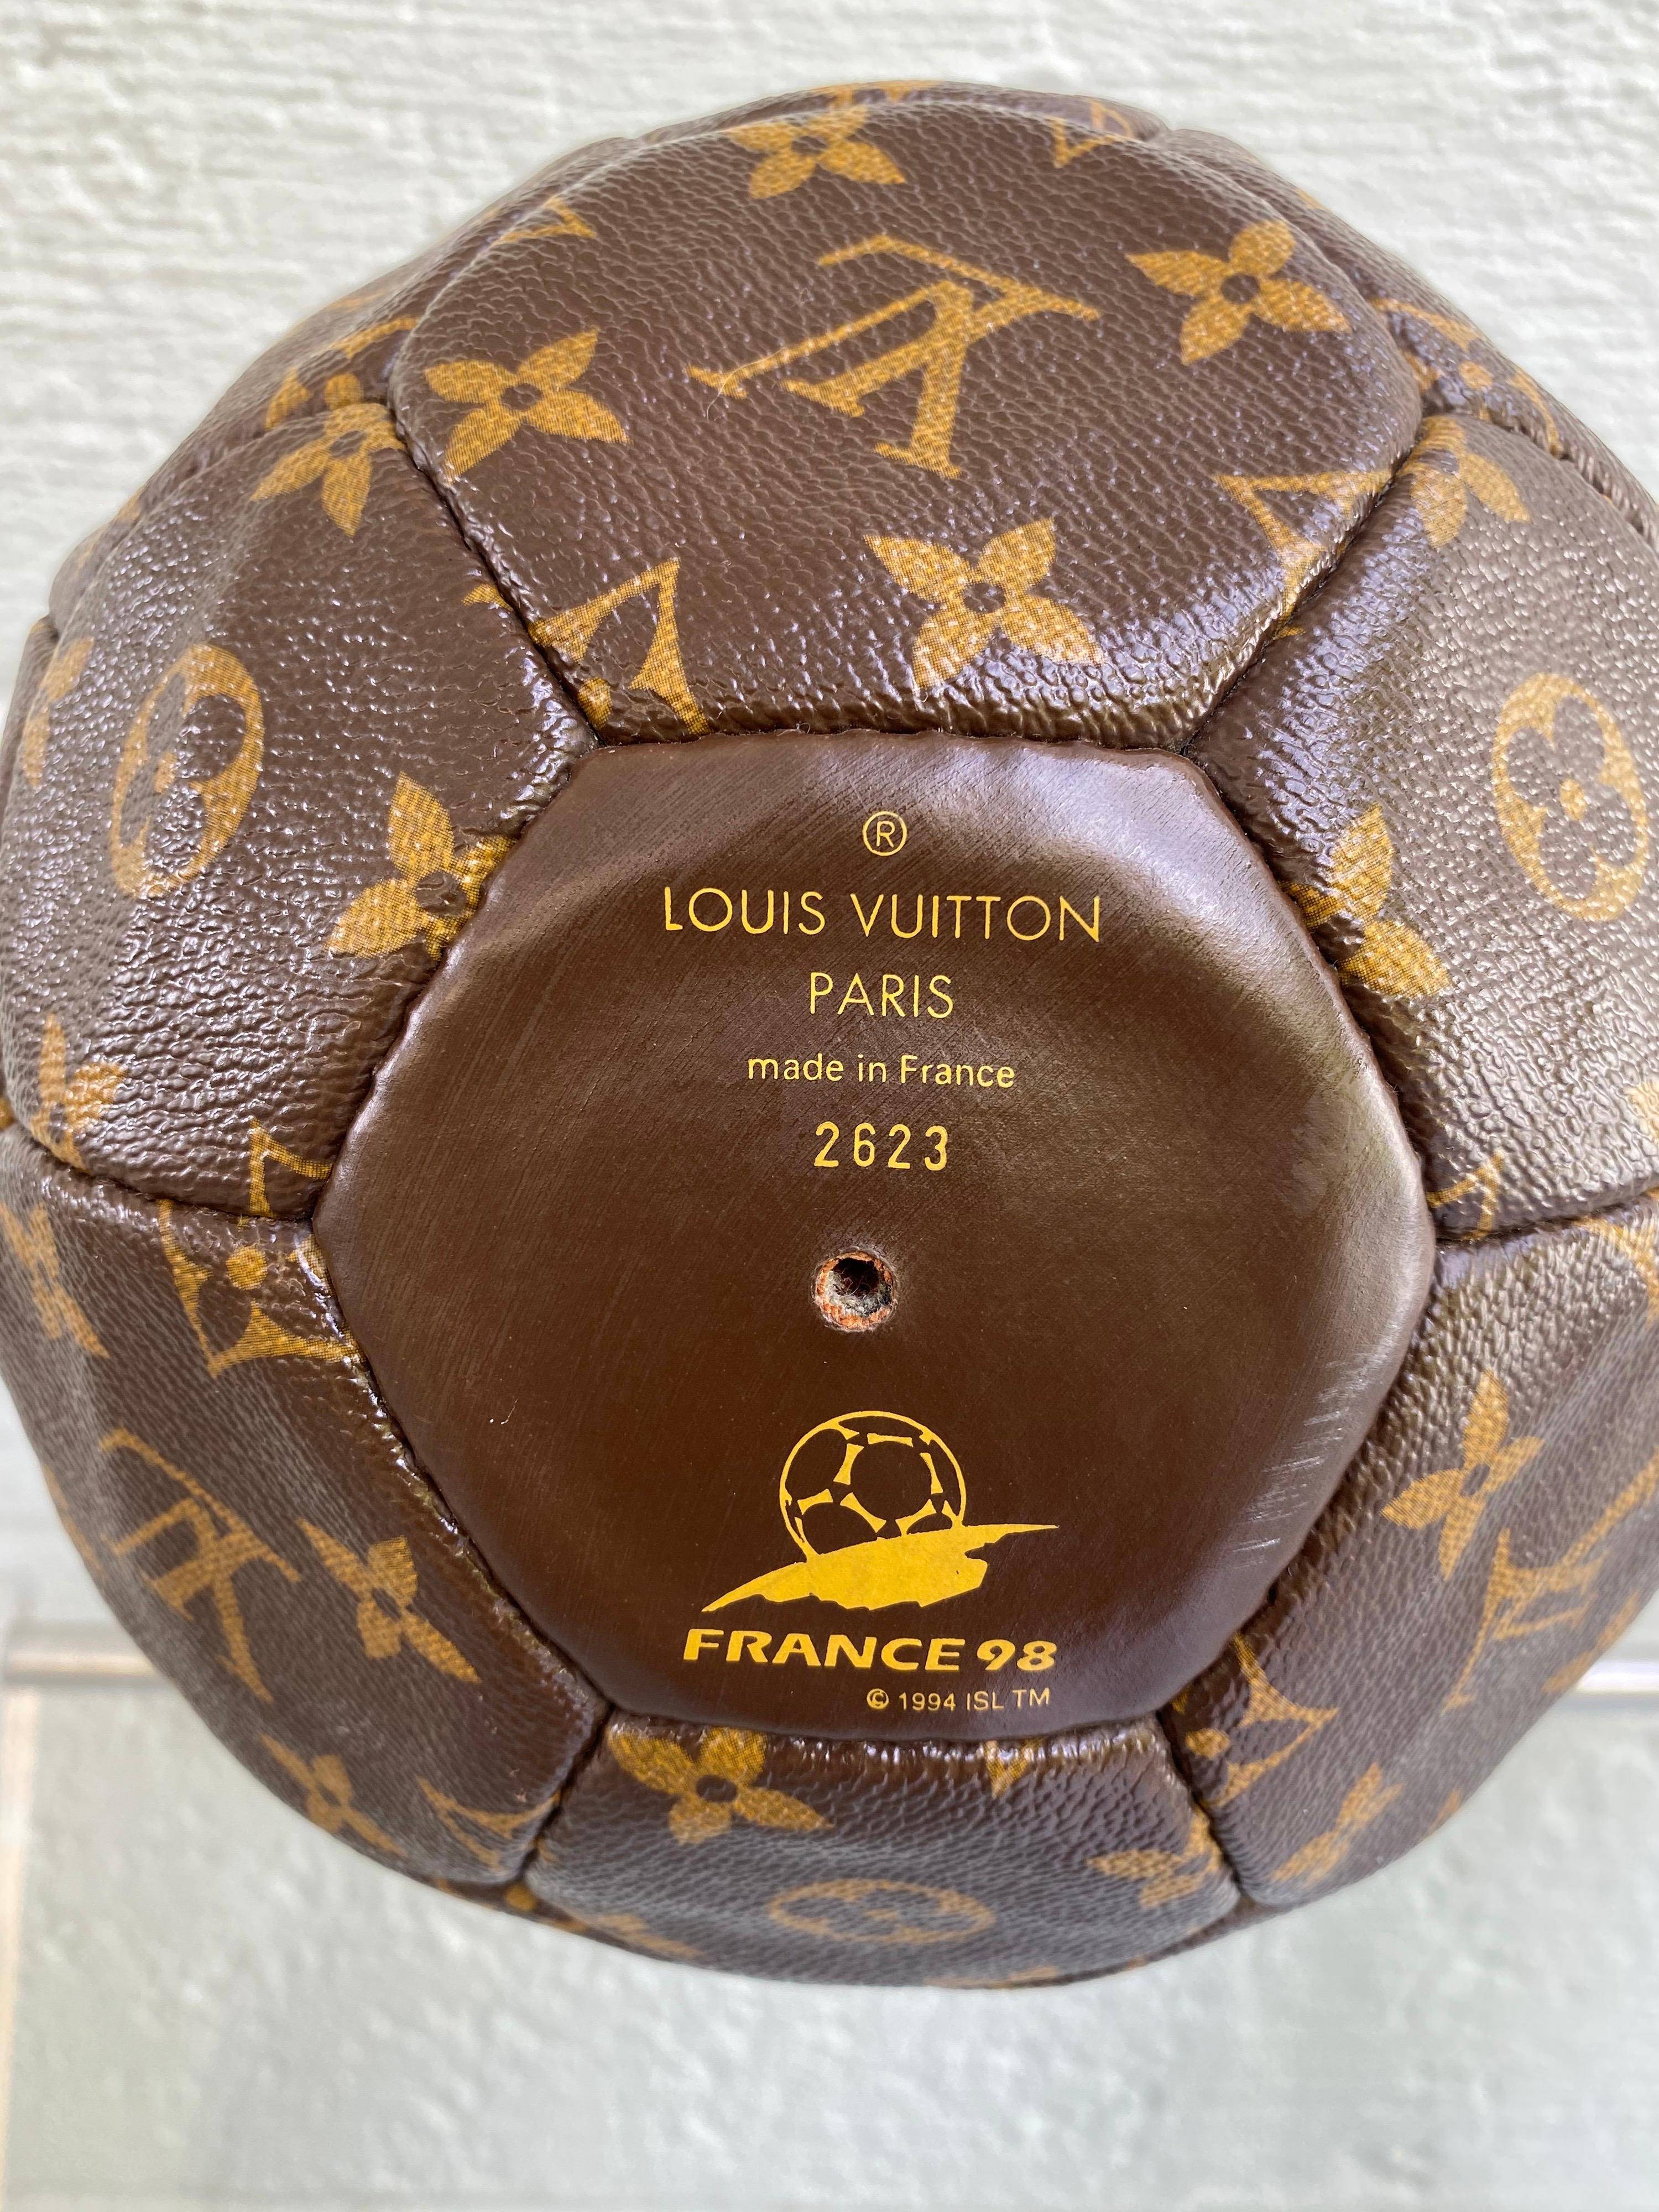 Louis Vuitton Monogram World Cup Limited Edition Soccer Ball 1